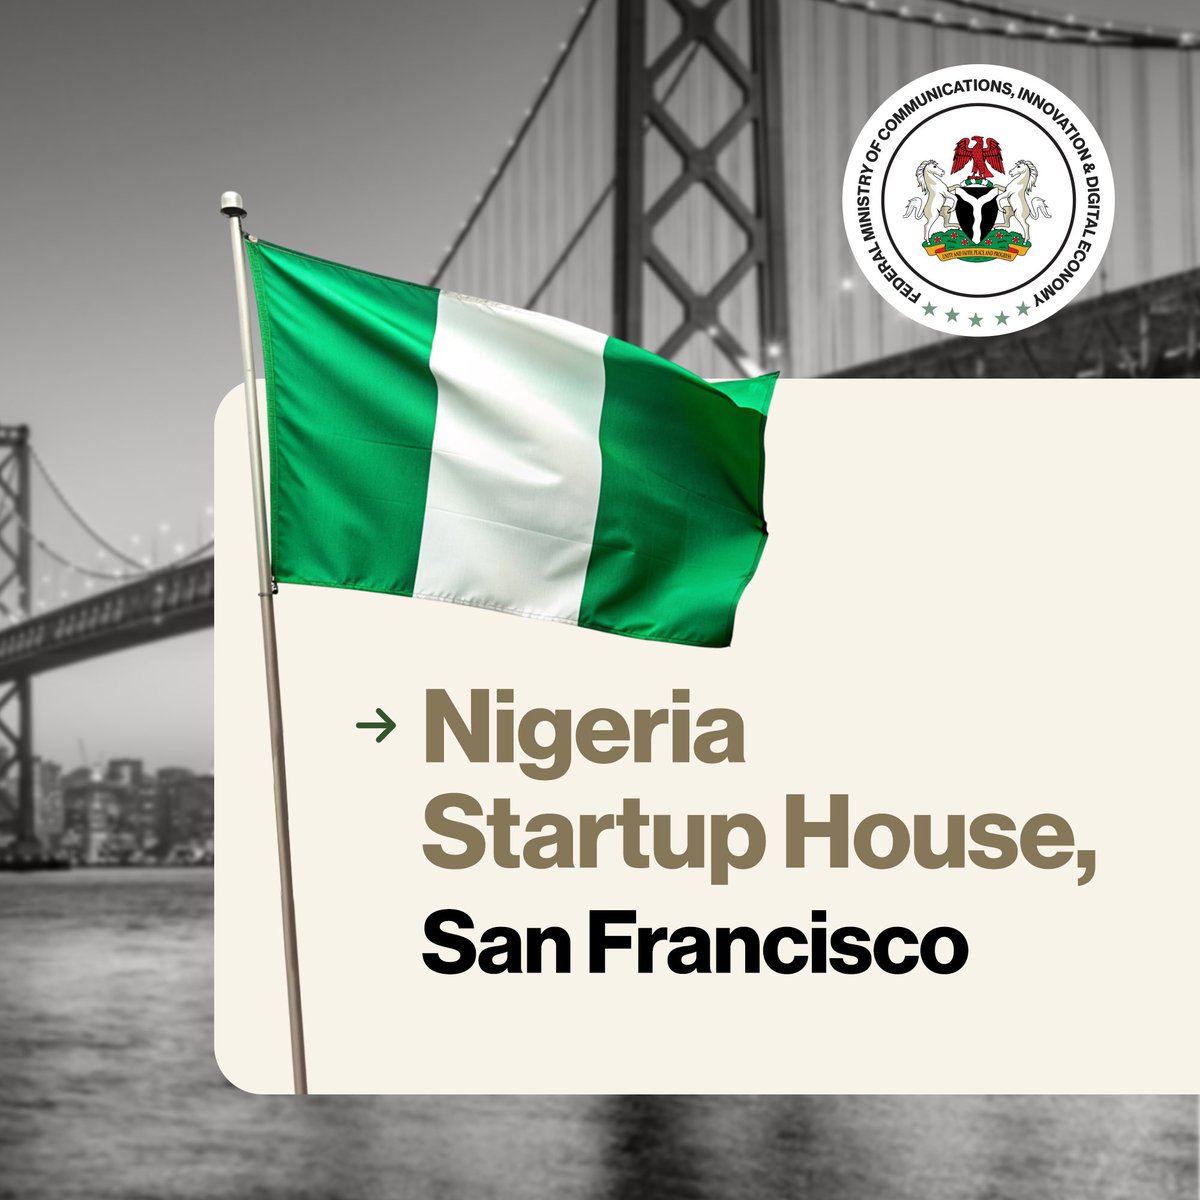 Another development from FEC today, which sits firmly in our desire as a Ministry to position Nigeria as a significant player in the global technology landscape, is the approval for the conversion of an existing property of the Federal Government in San Francisco, USA to a